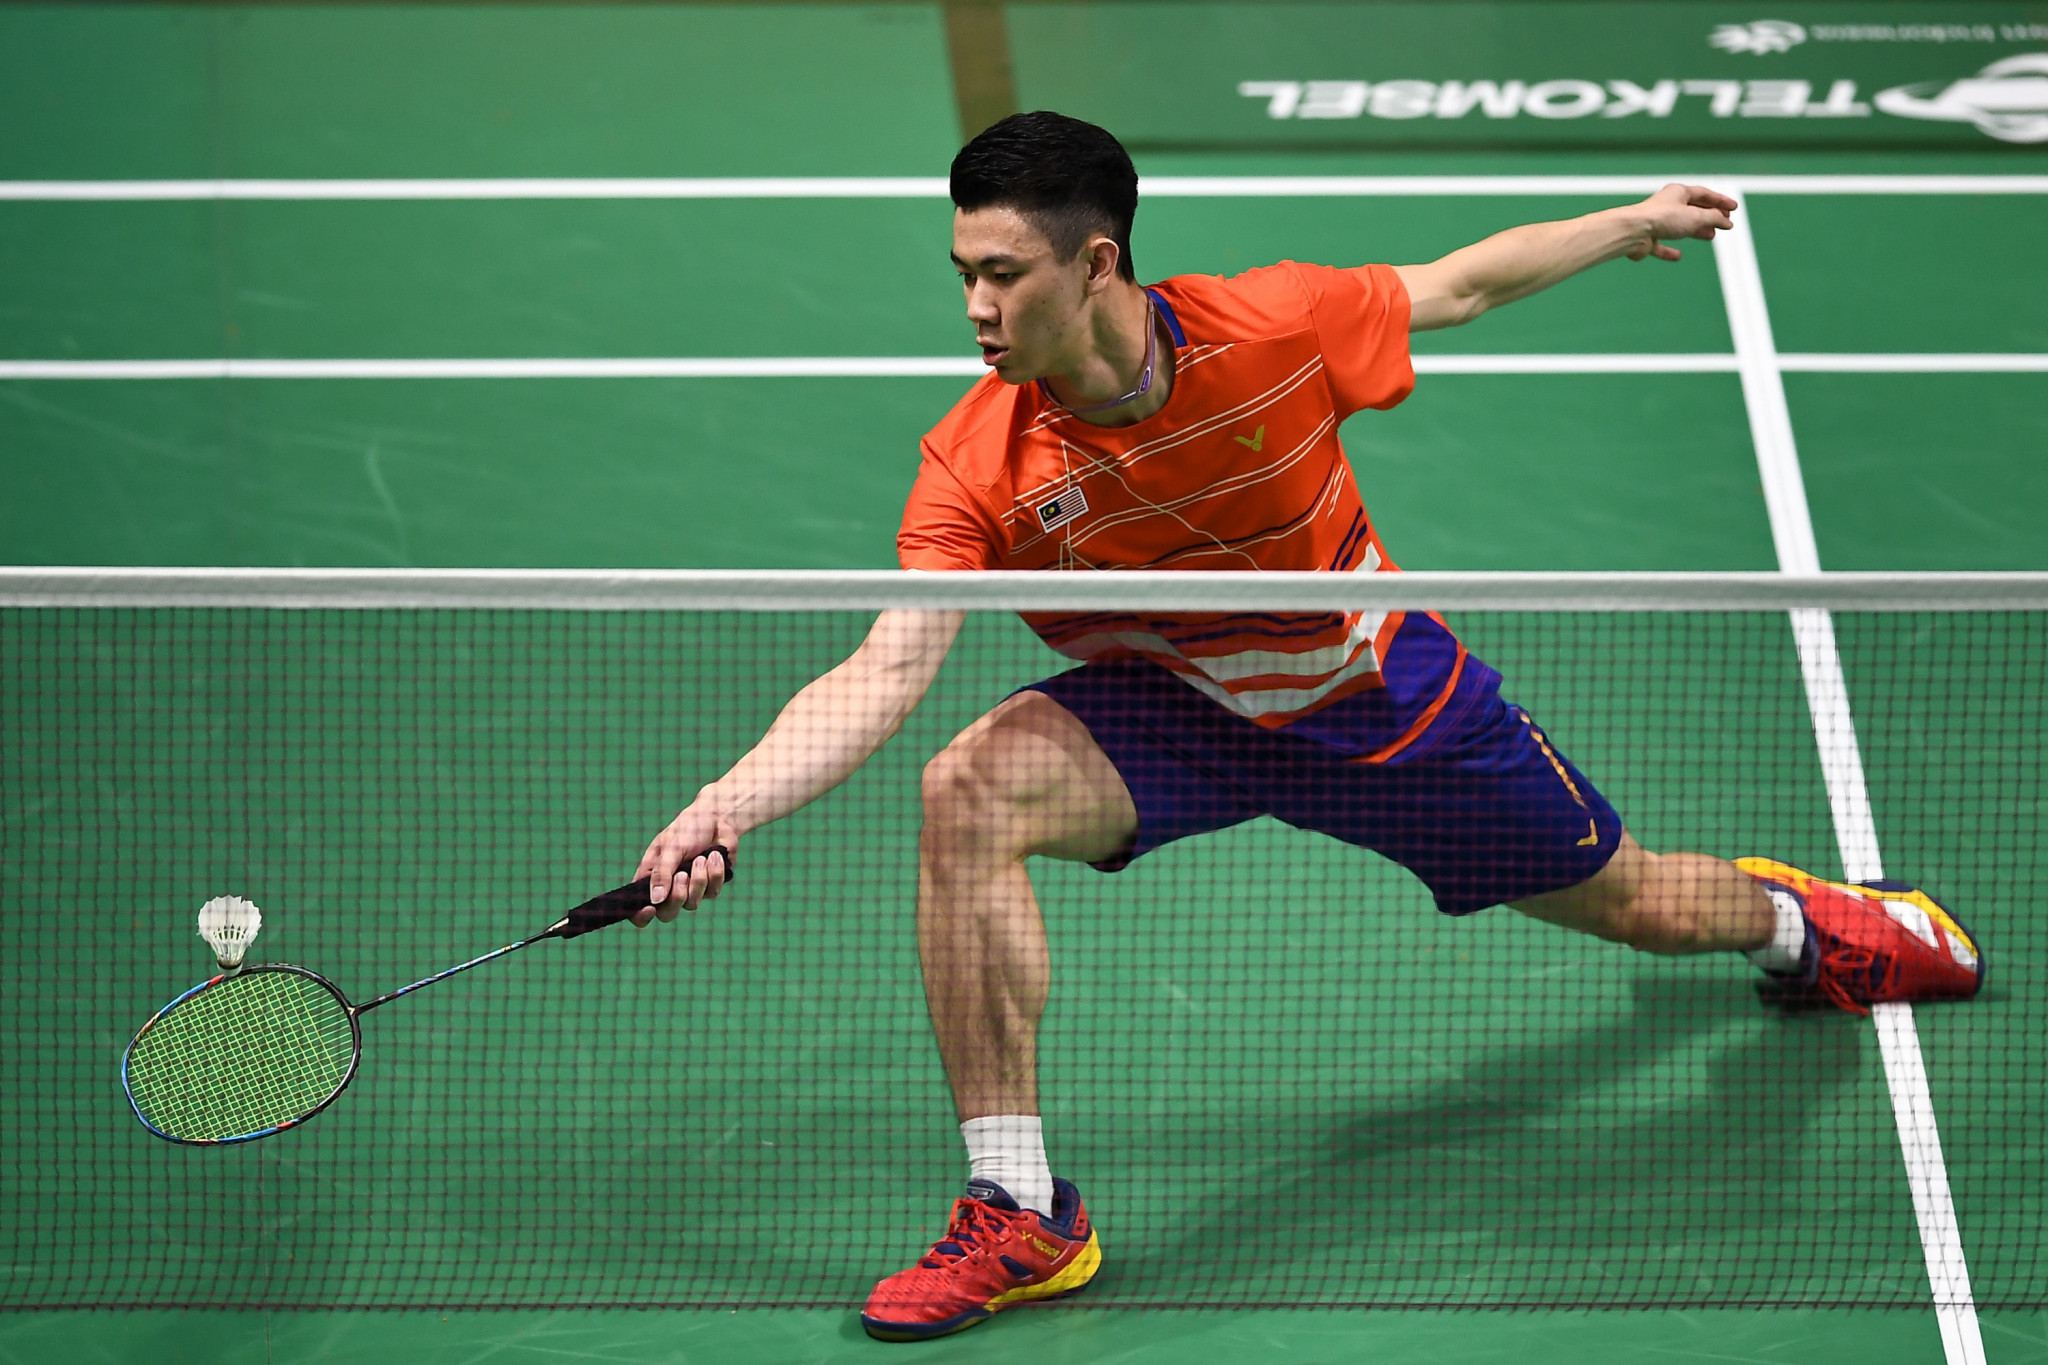 Home favourite Lee comes through qualification at BWF Malaysia Masters